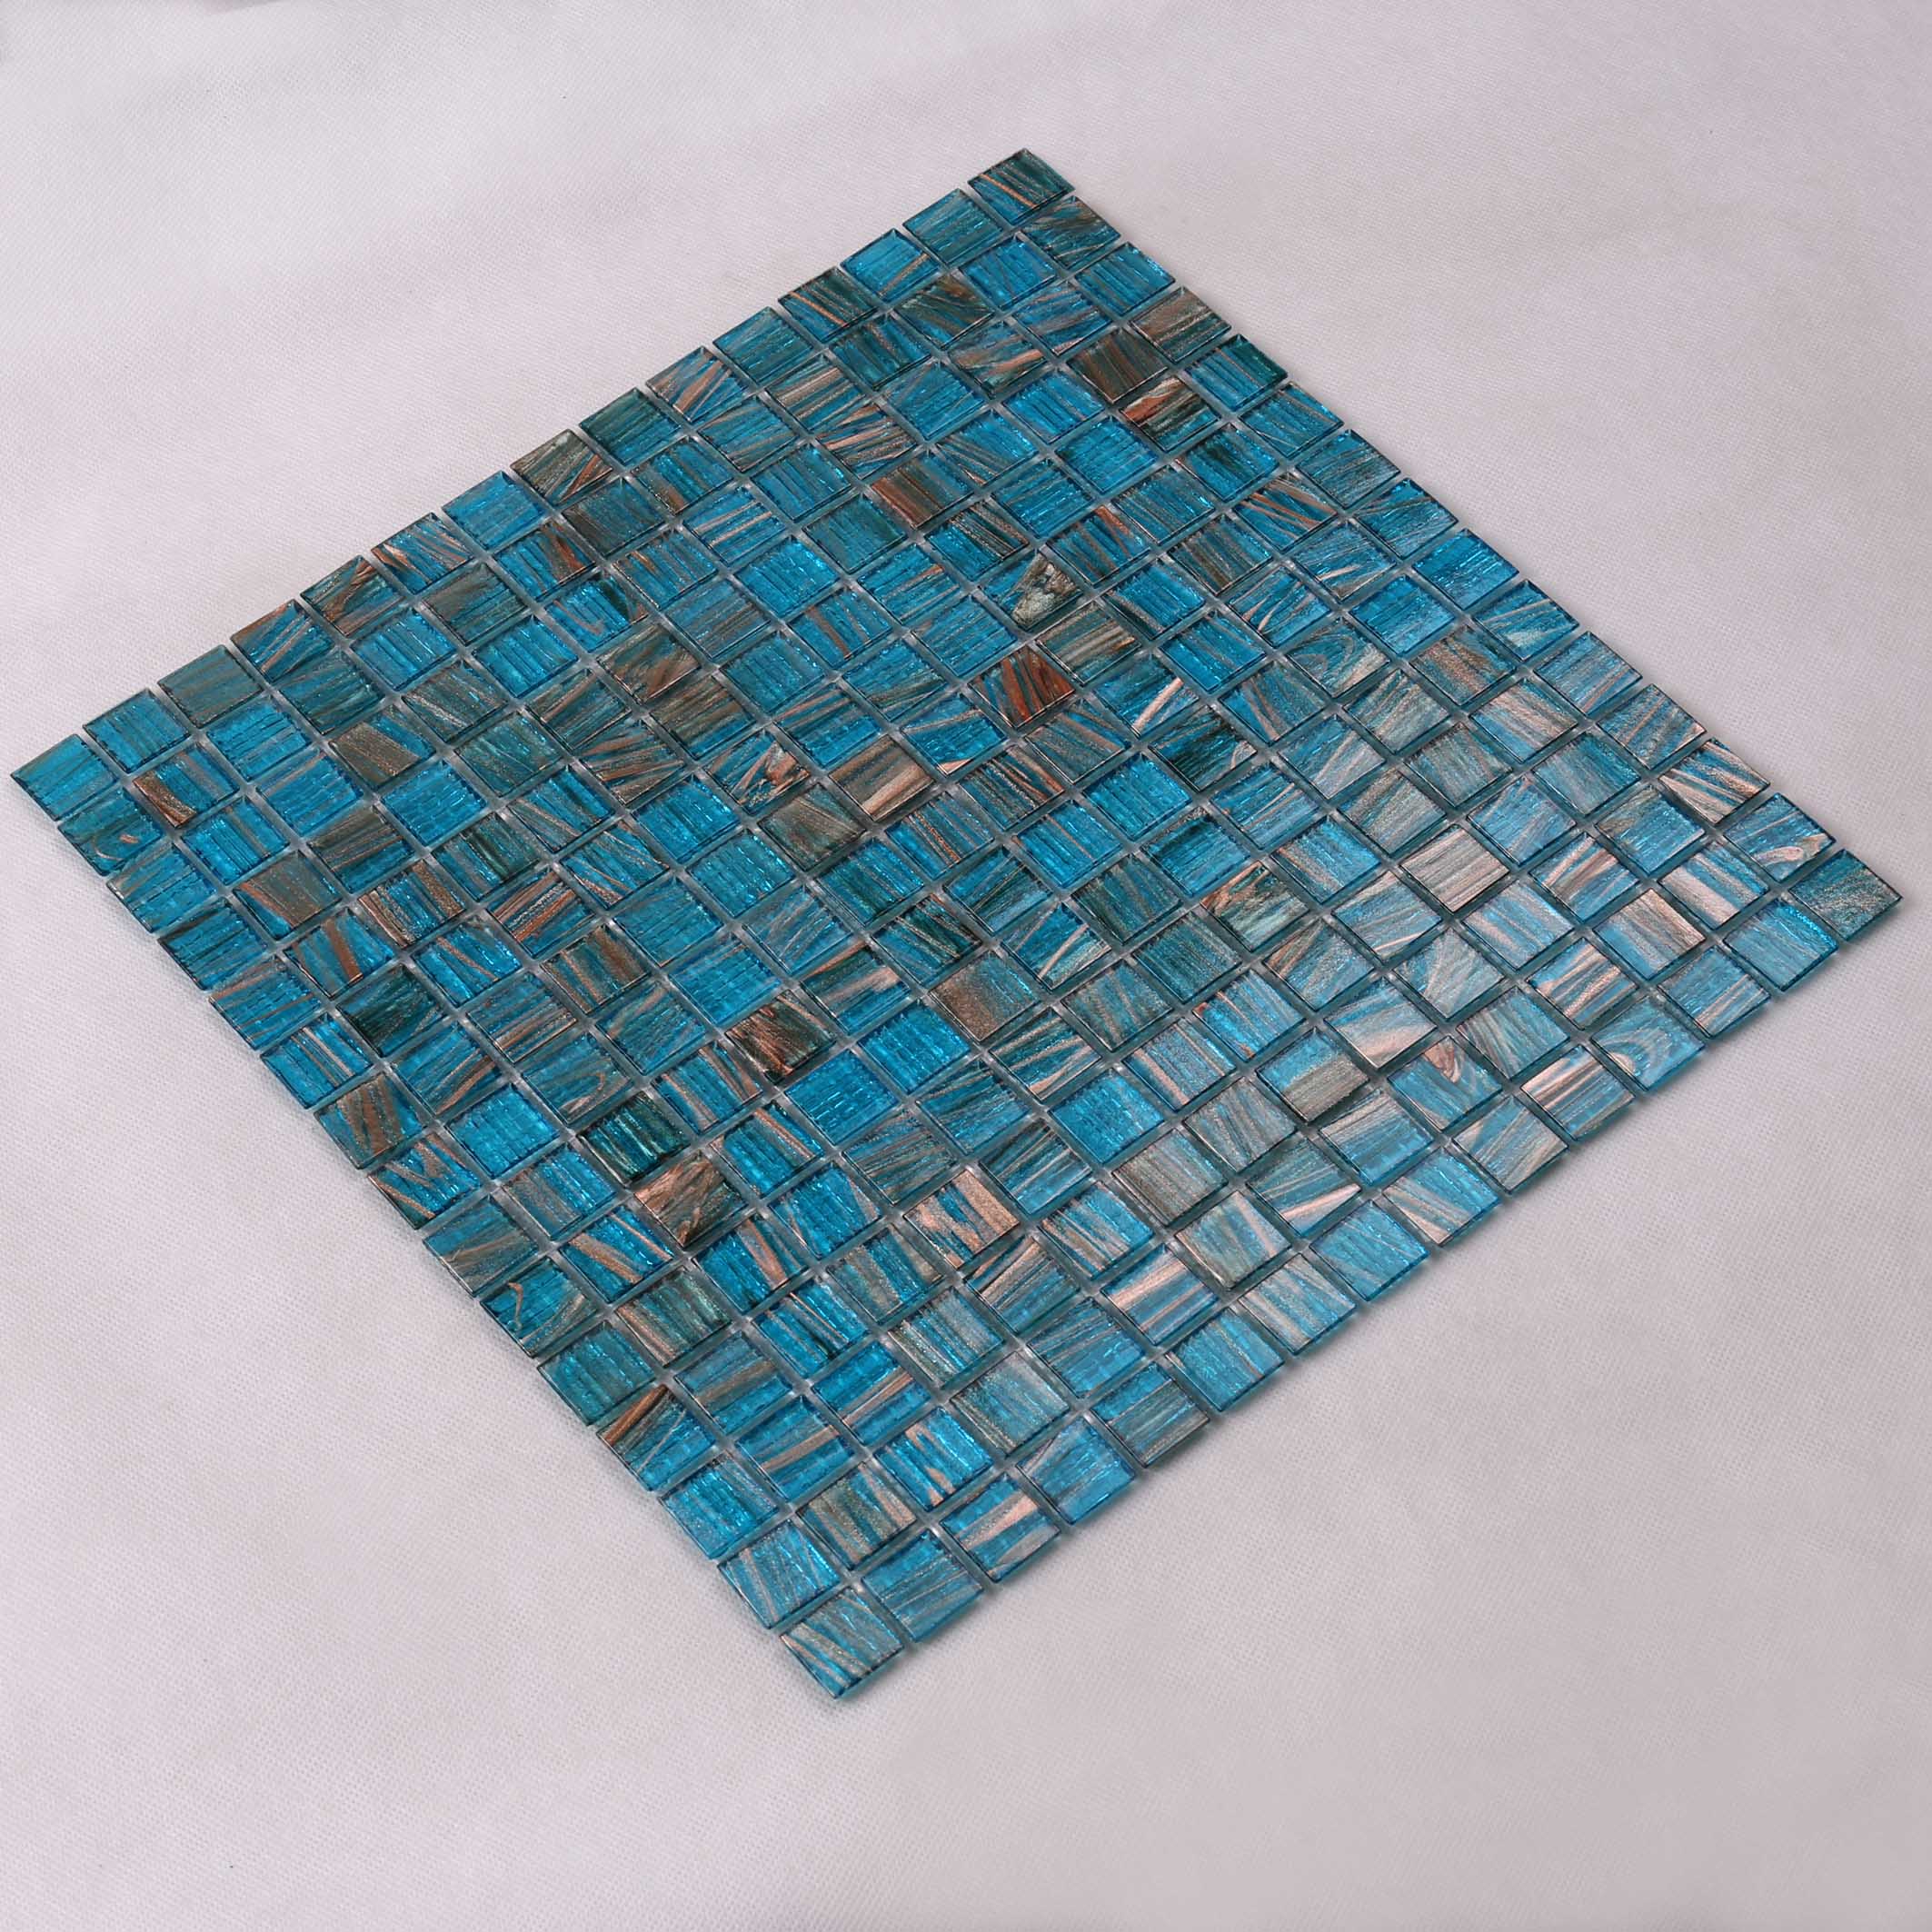 news-Top green glass mosaic tile floor supplier for spa-Heng Xing-img